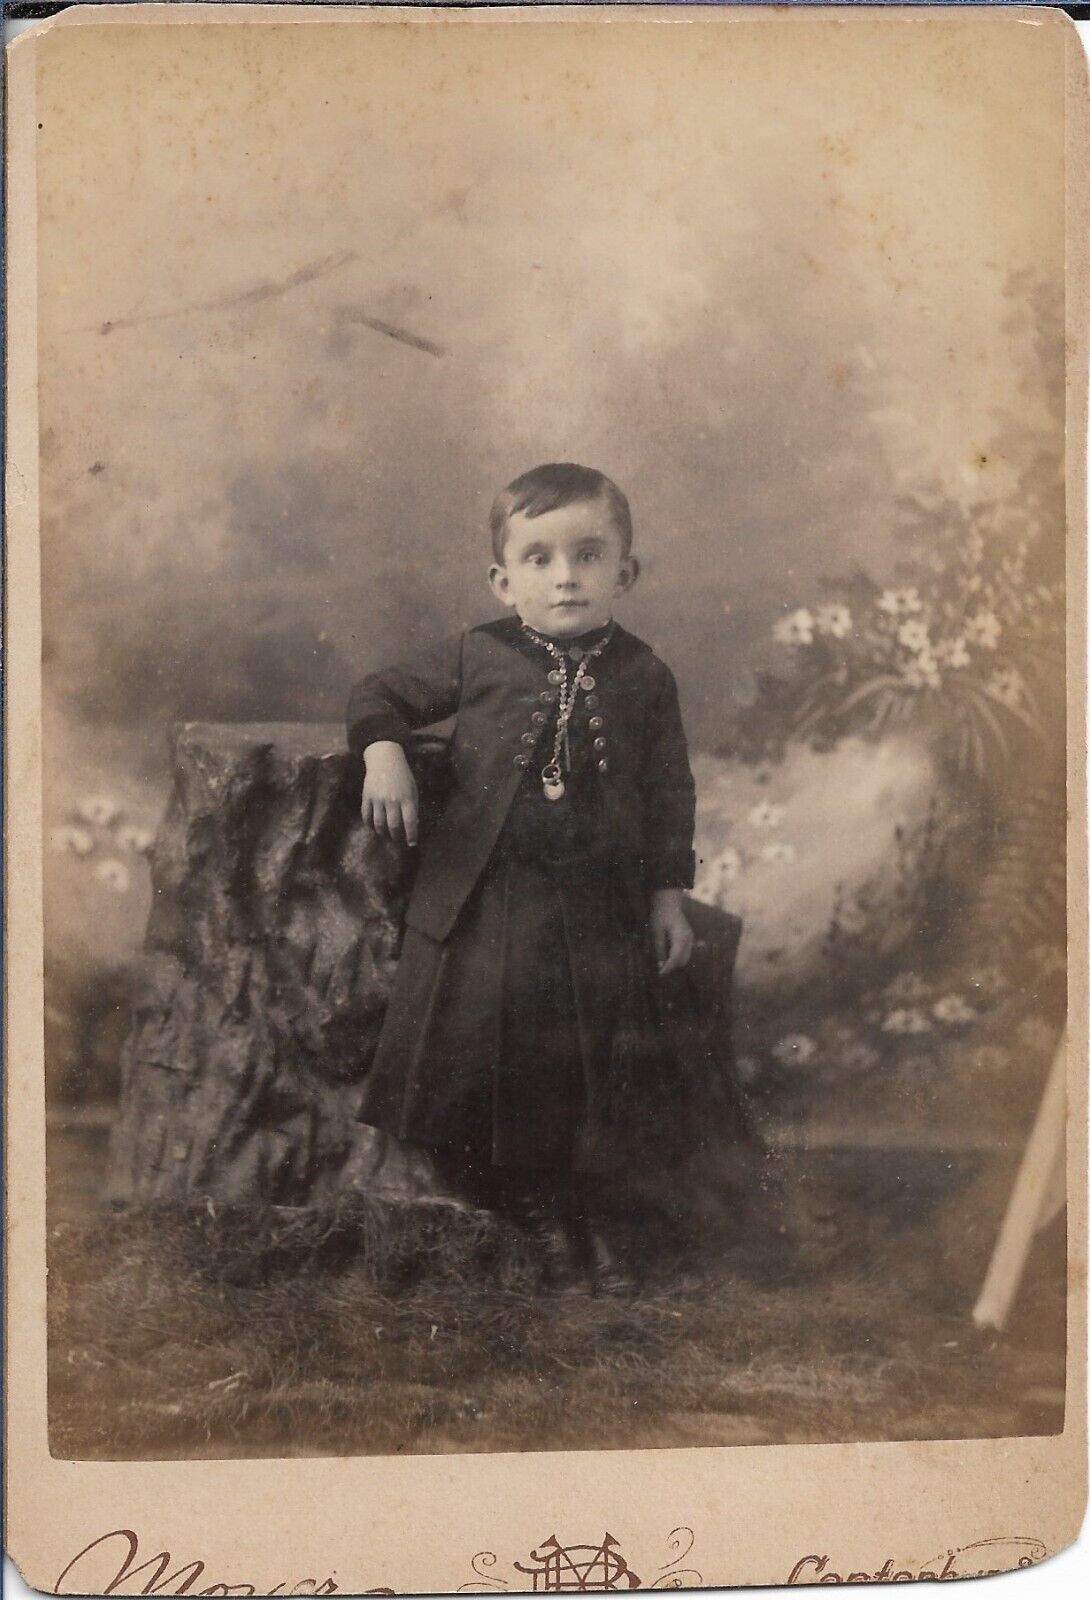 Young Boy Photograph Studio Pose Late 1800s Cabinet Card 4x6